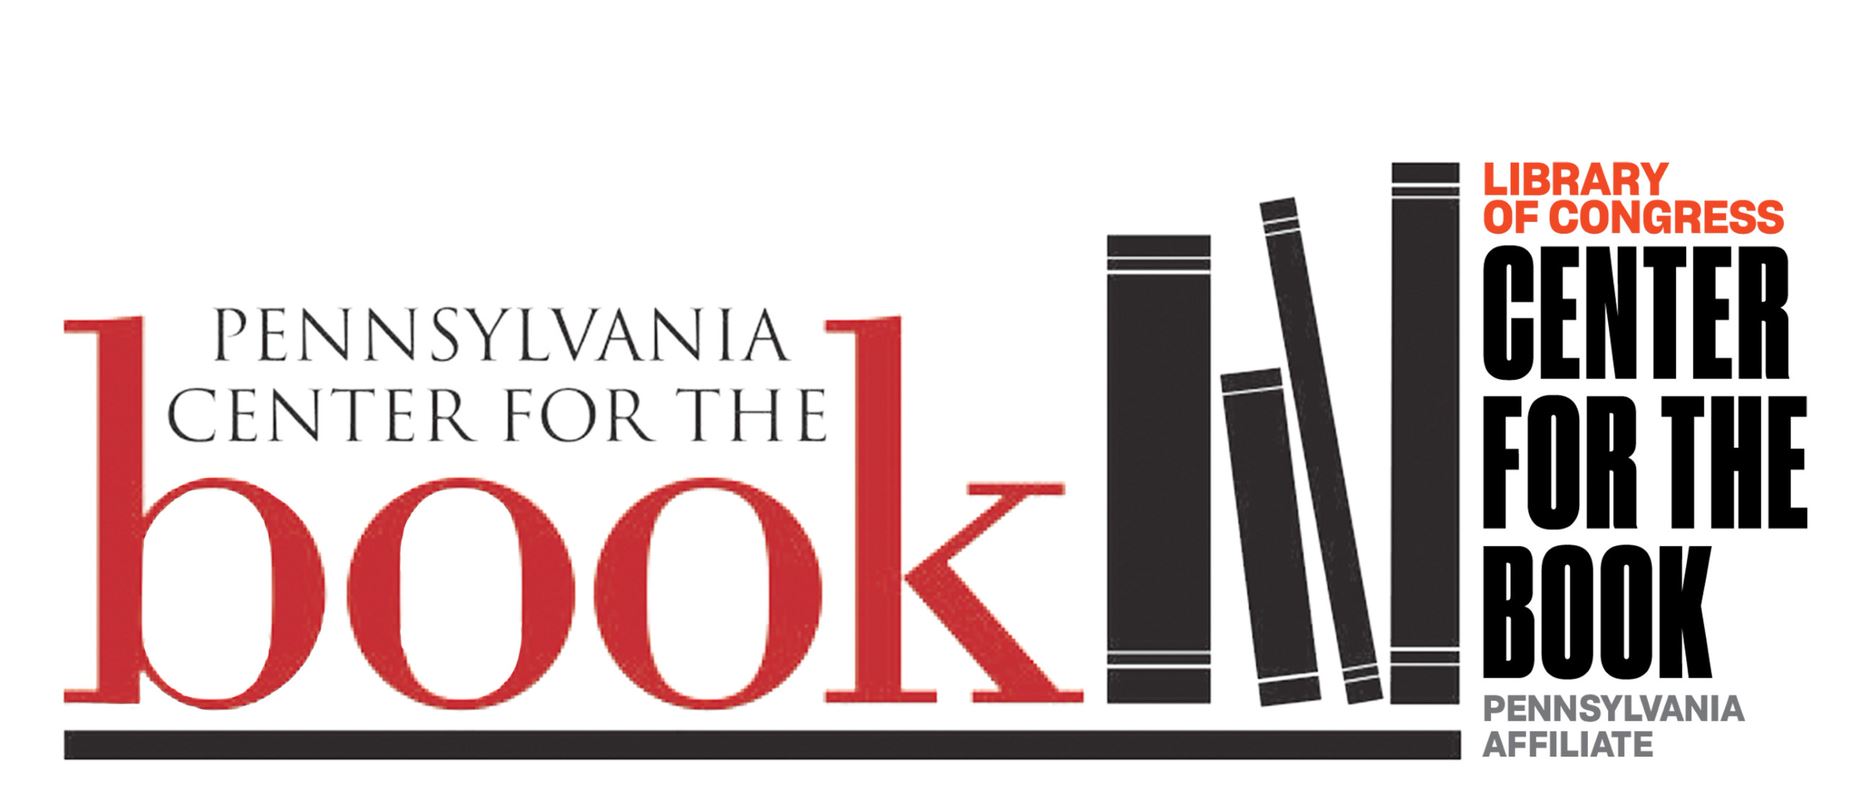 Logo of the Pennsylvania Center for the Book, showing the organization's name and a stack of books on a shelf.